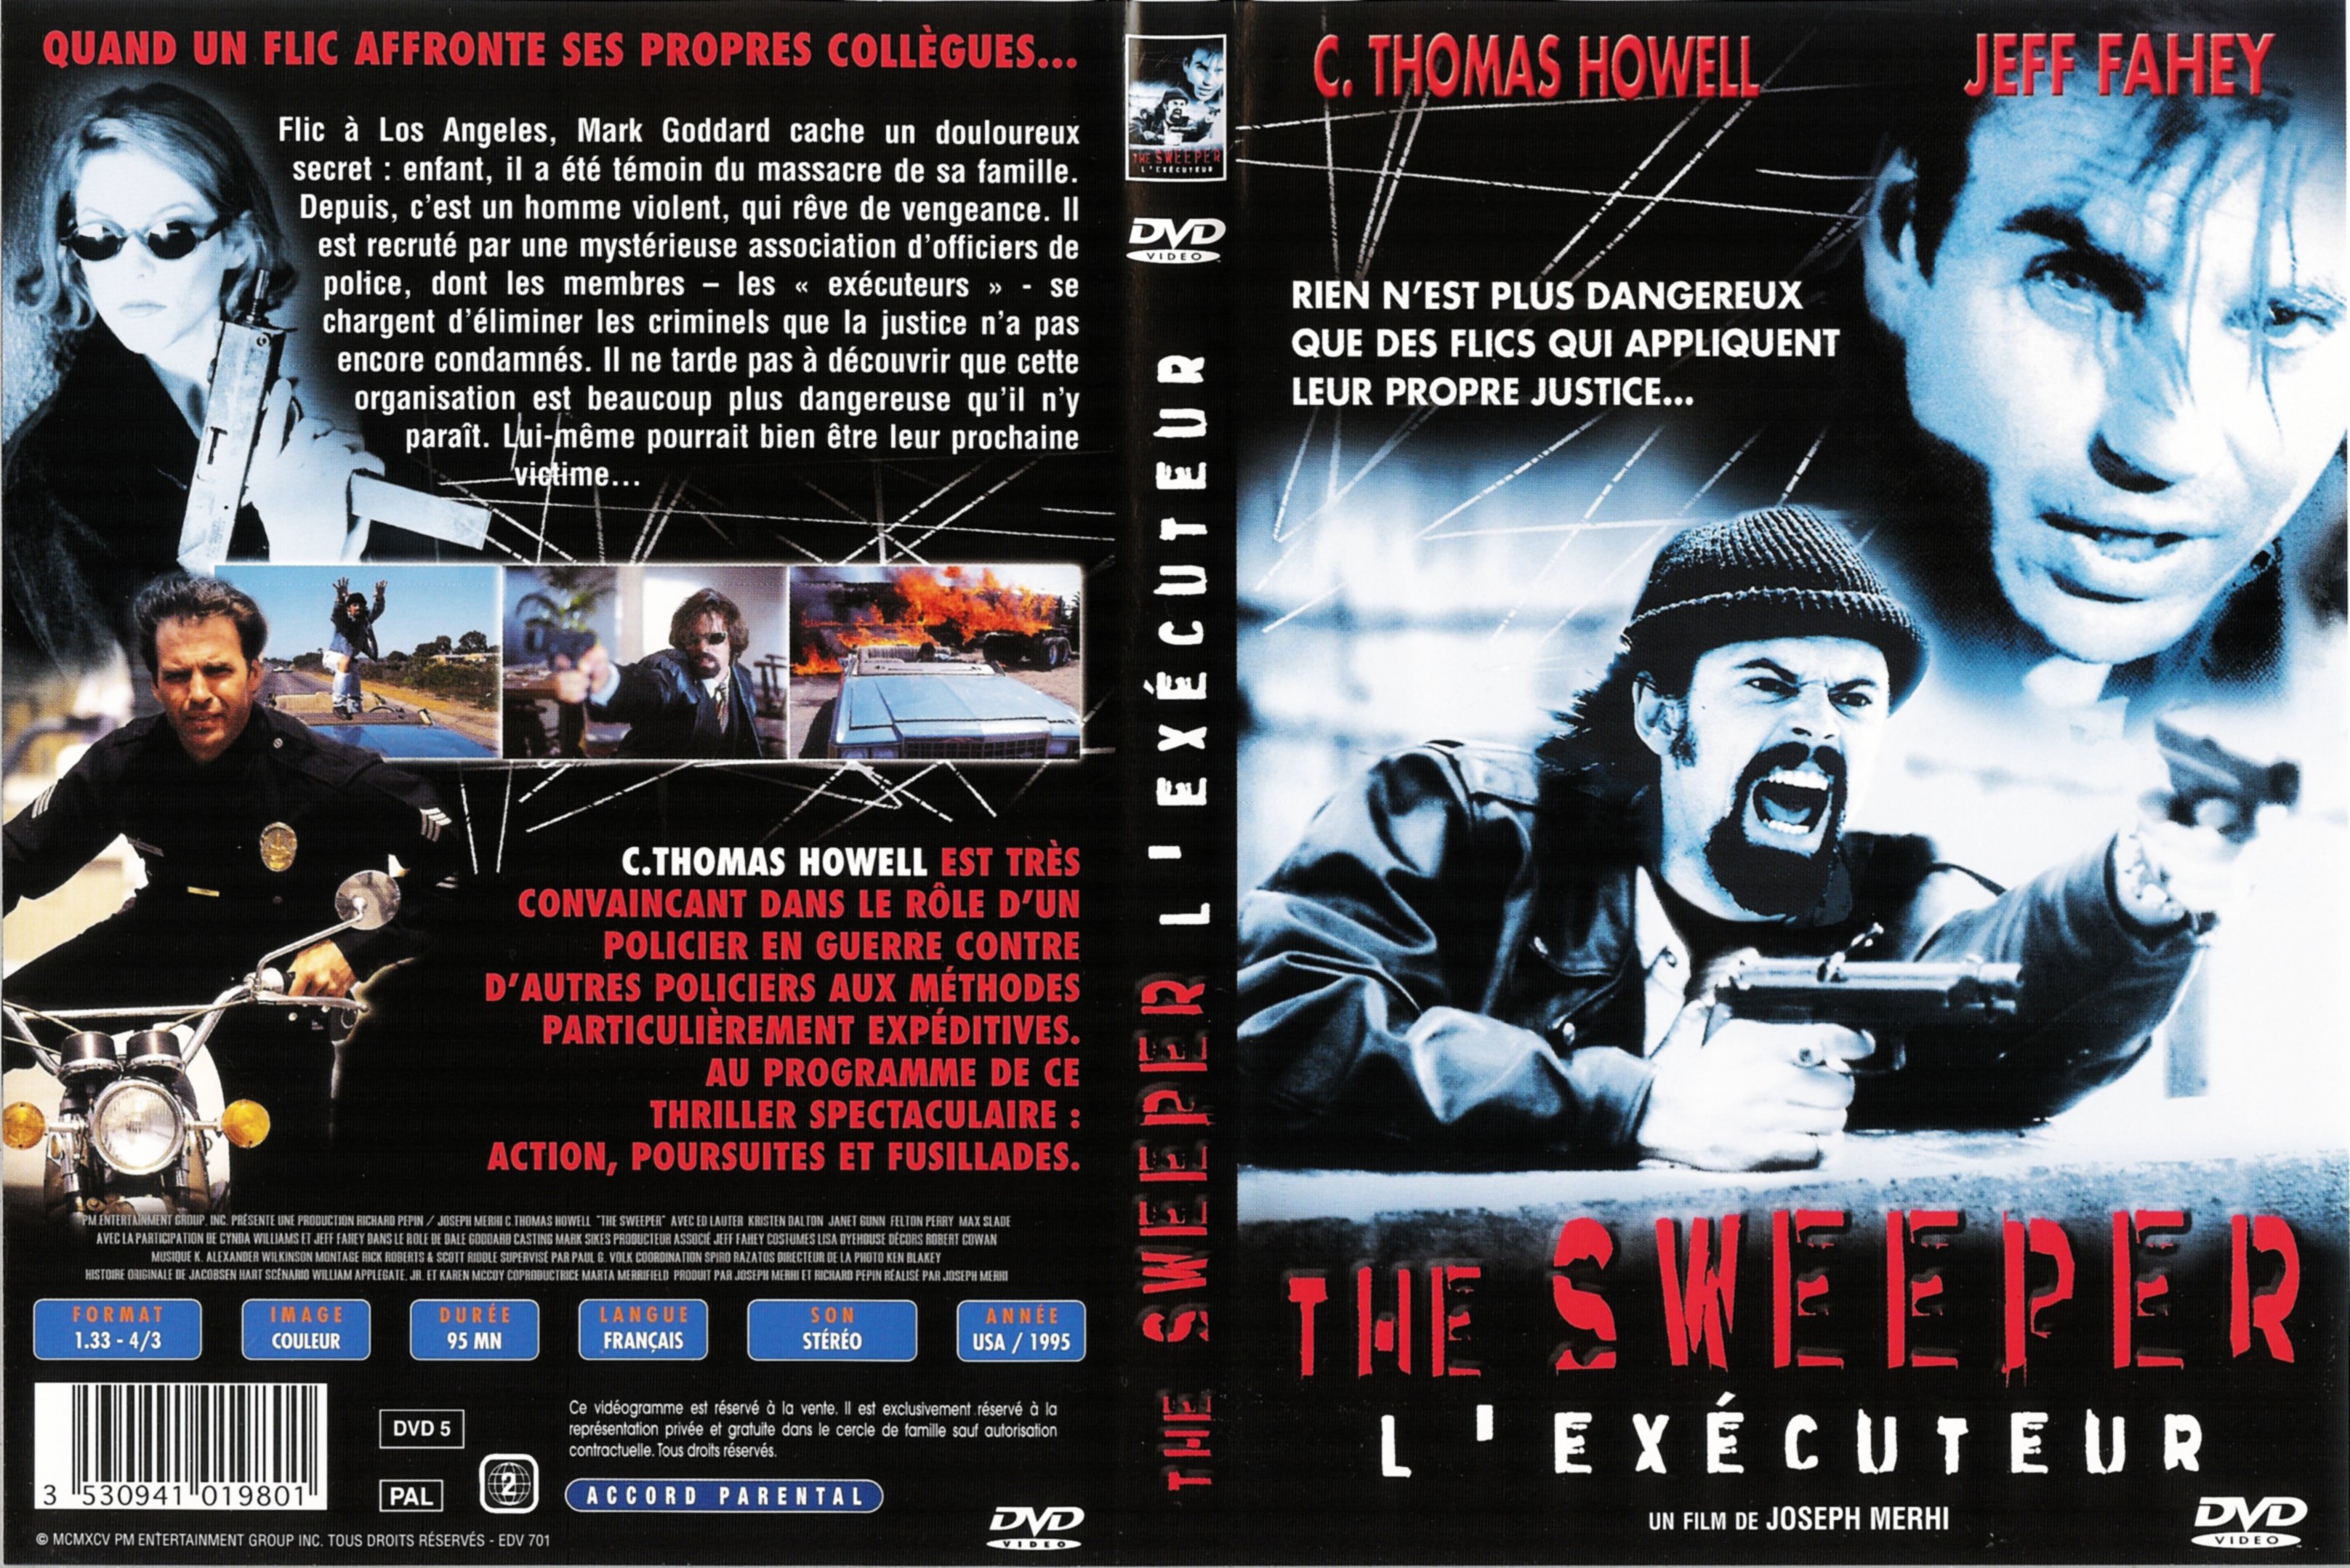 Jaquette DVD The sweeper l